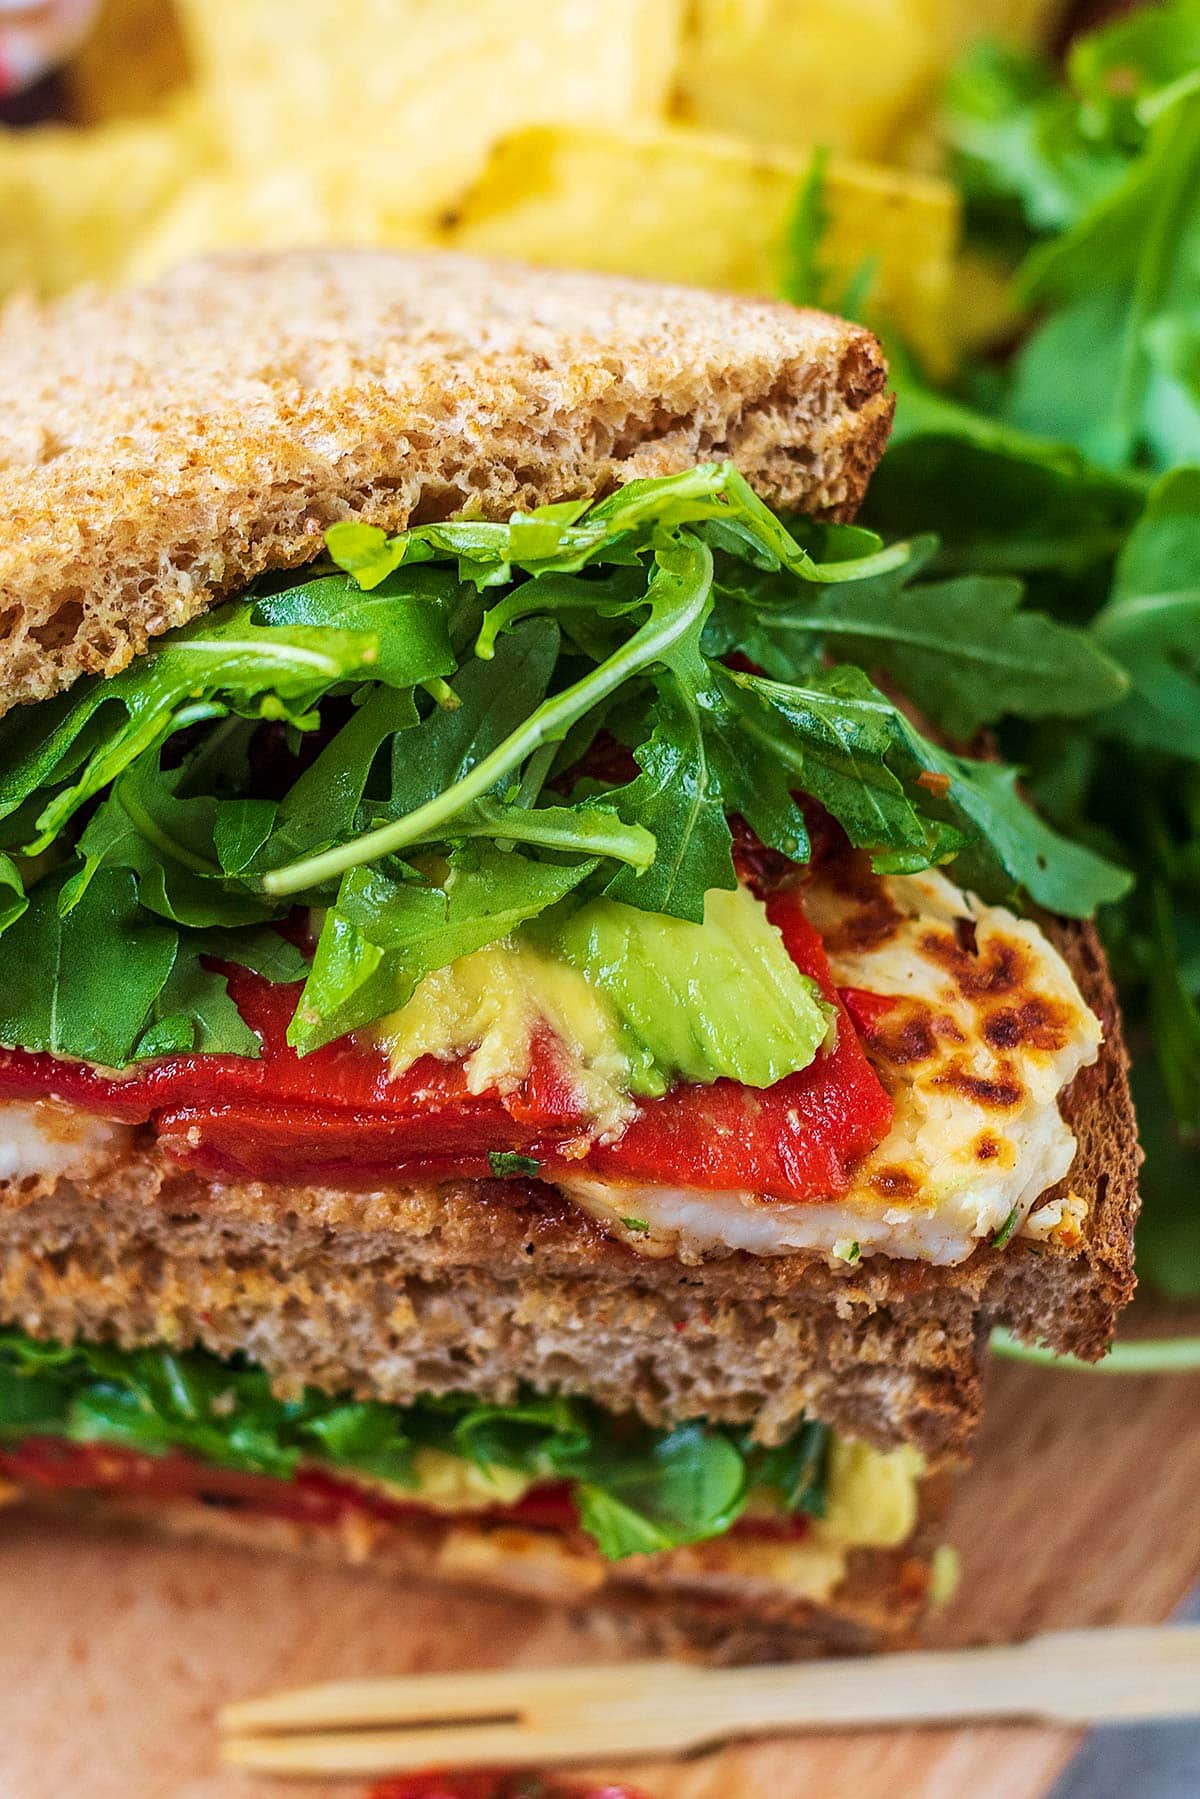 Halloumi, red peppers, avocado and lettuce spilling out of a sandwich.